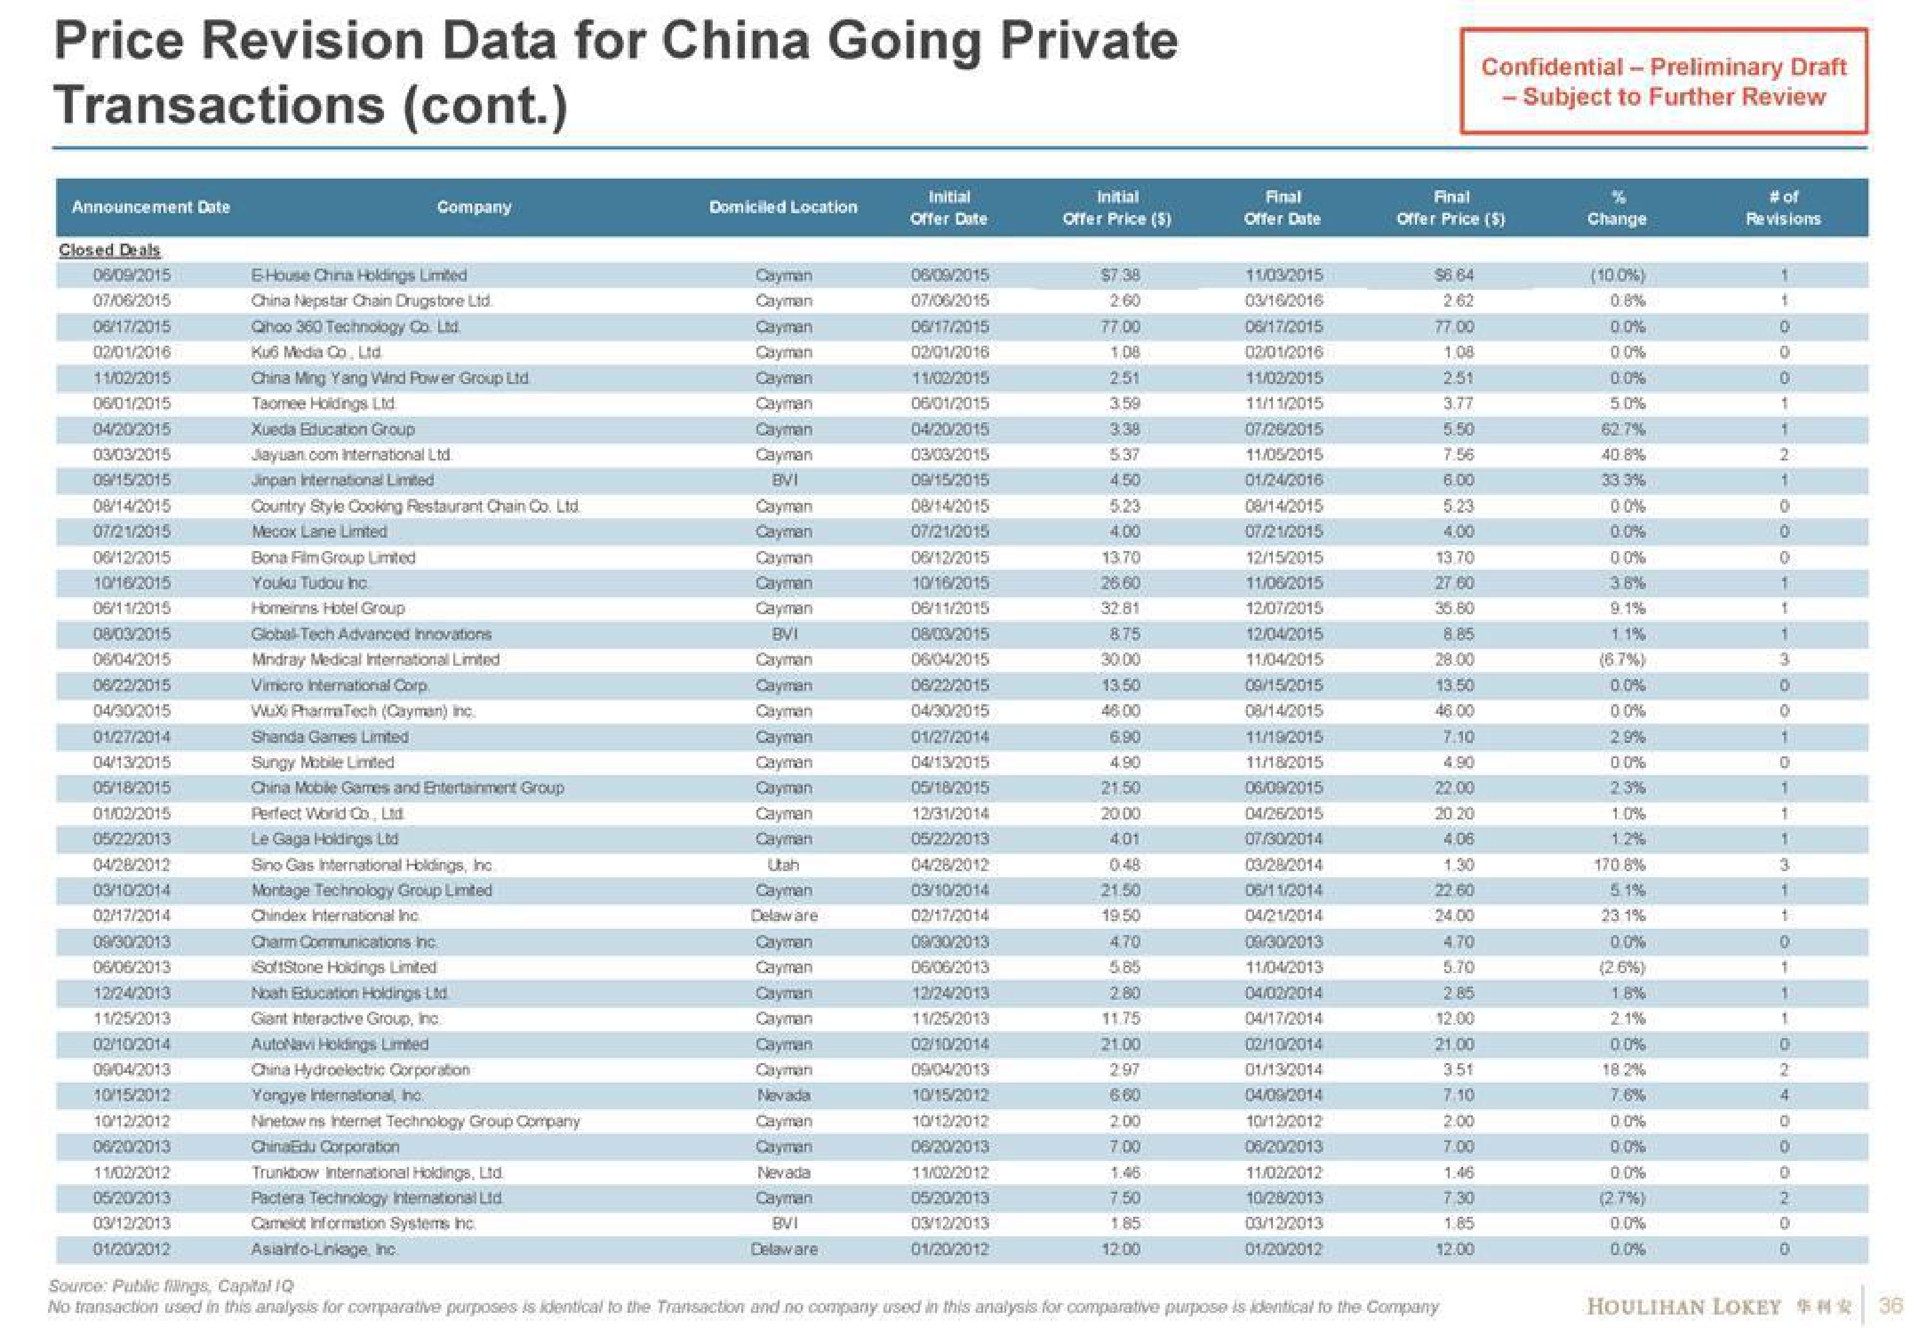 price revision data for china going private | Houlihan Lokey